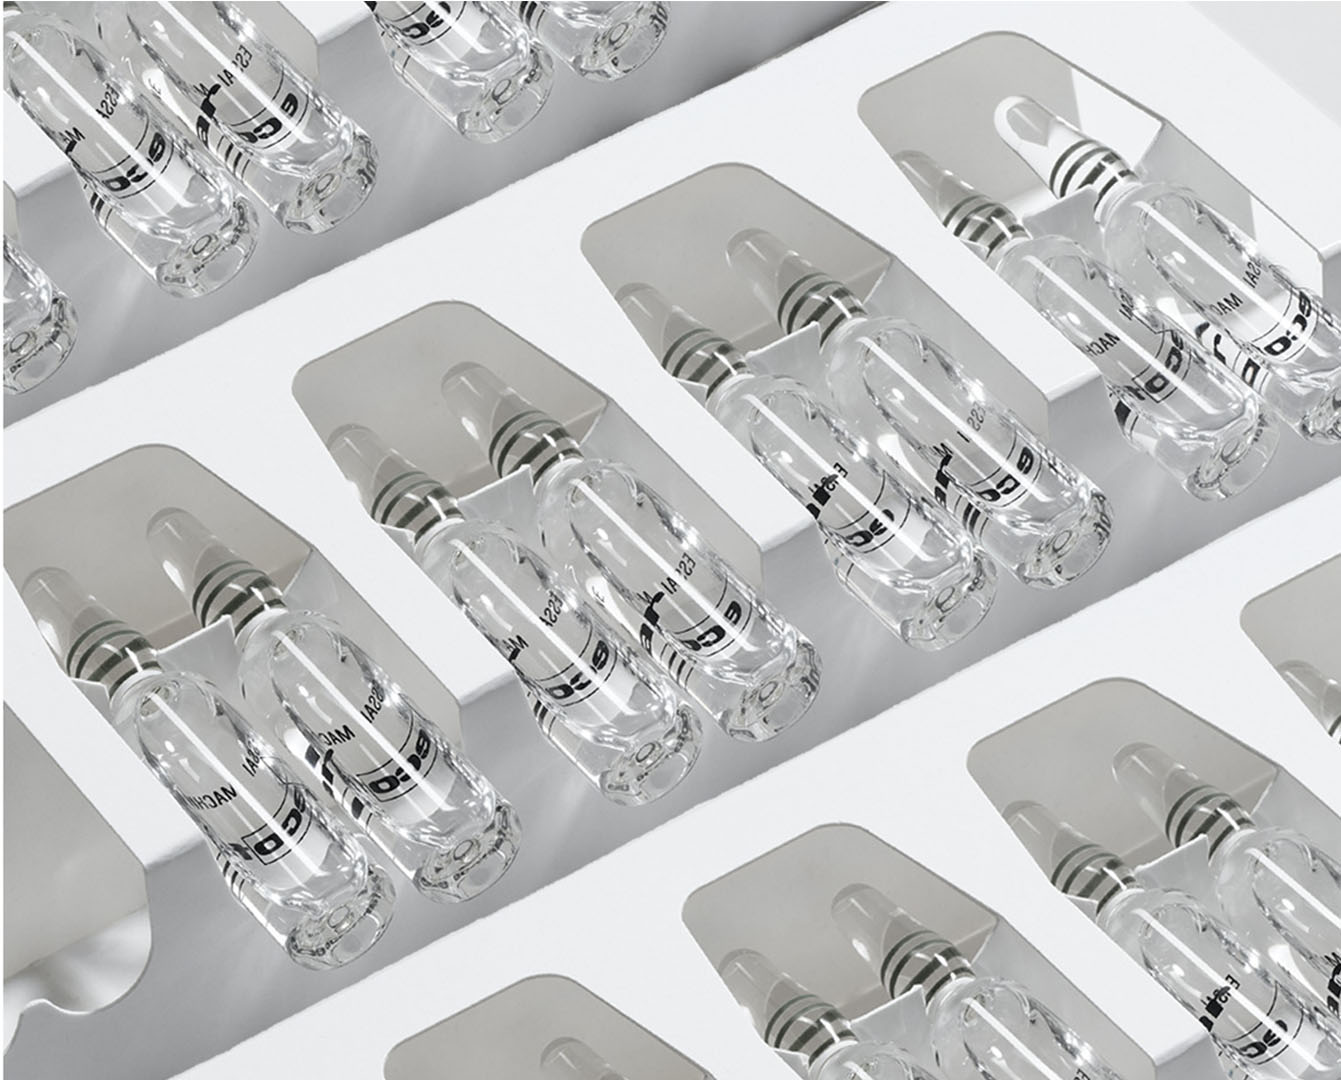 Package with several sets of new empty ampoules